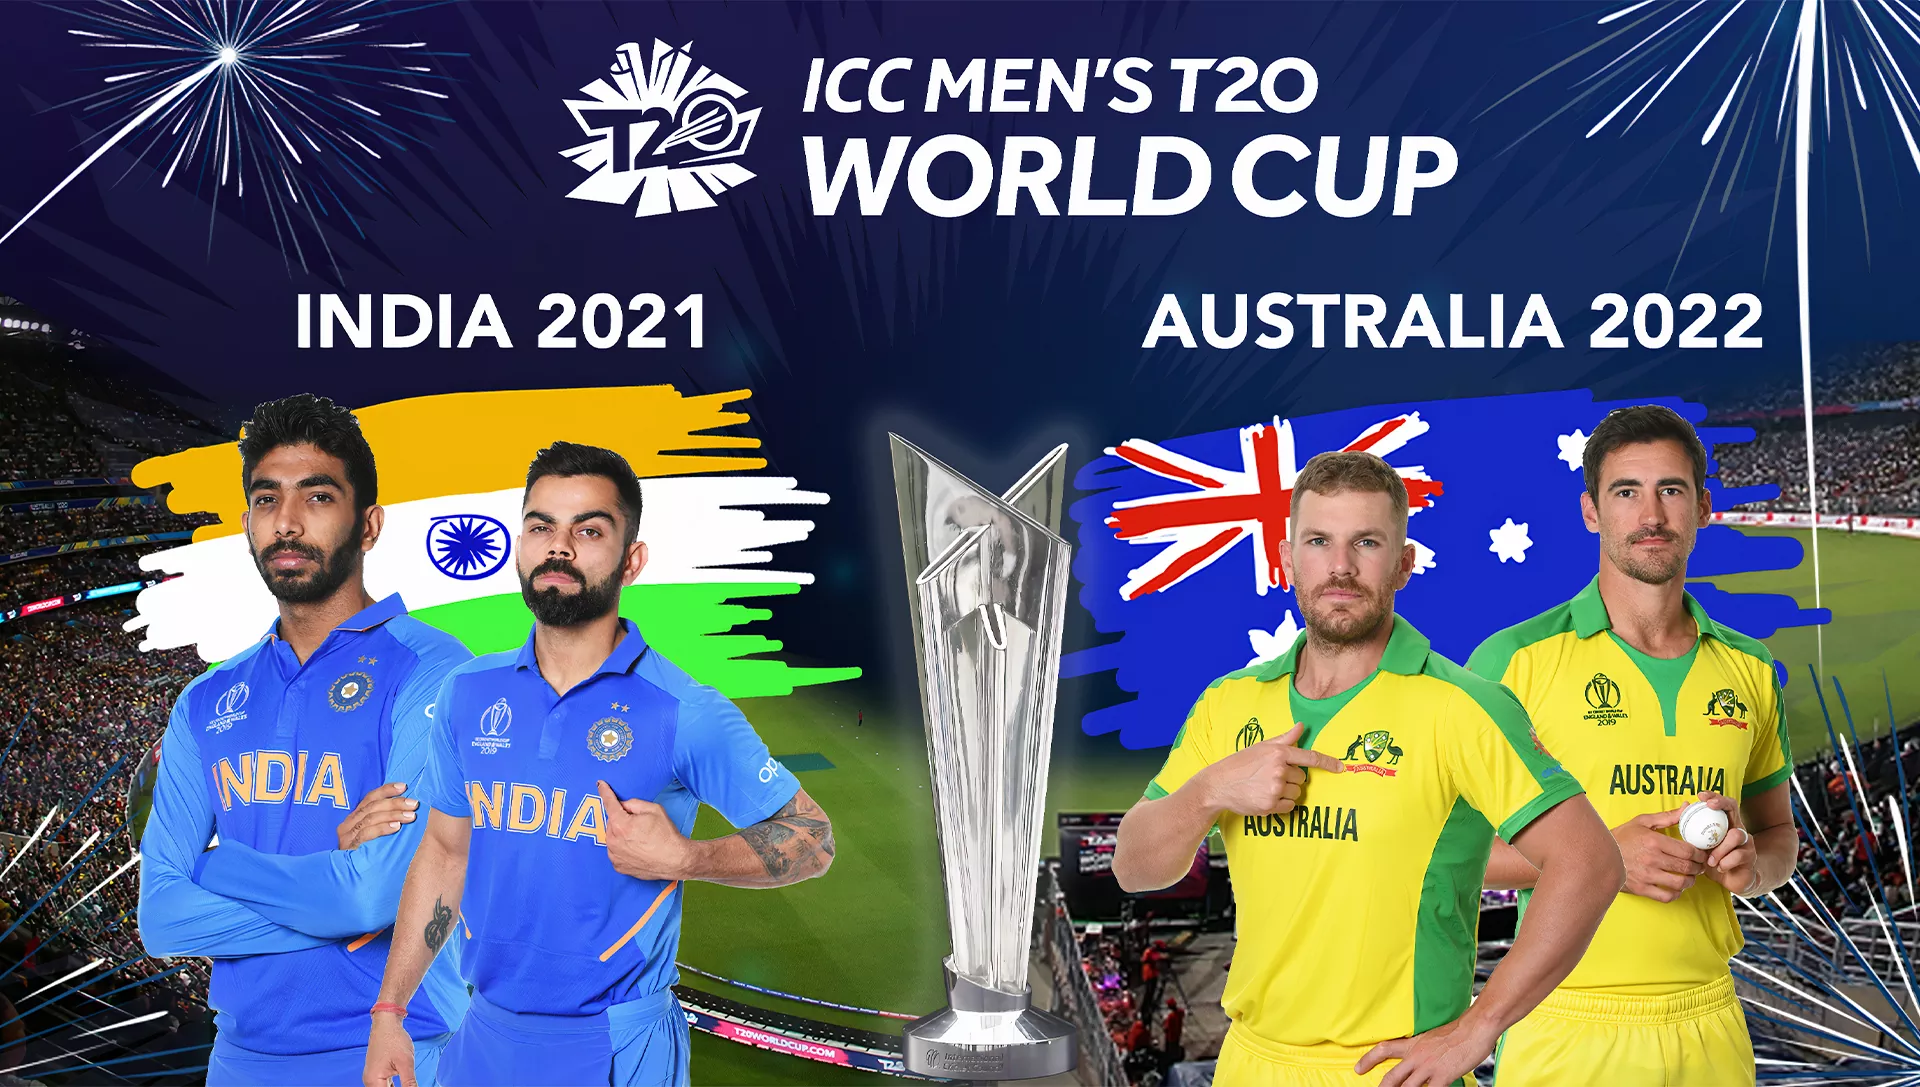 You can place bets on World T20 after registering on the site.